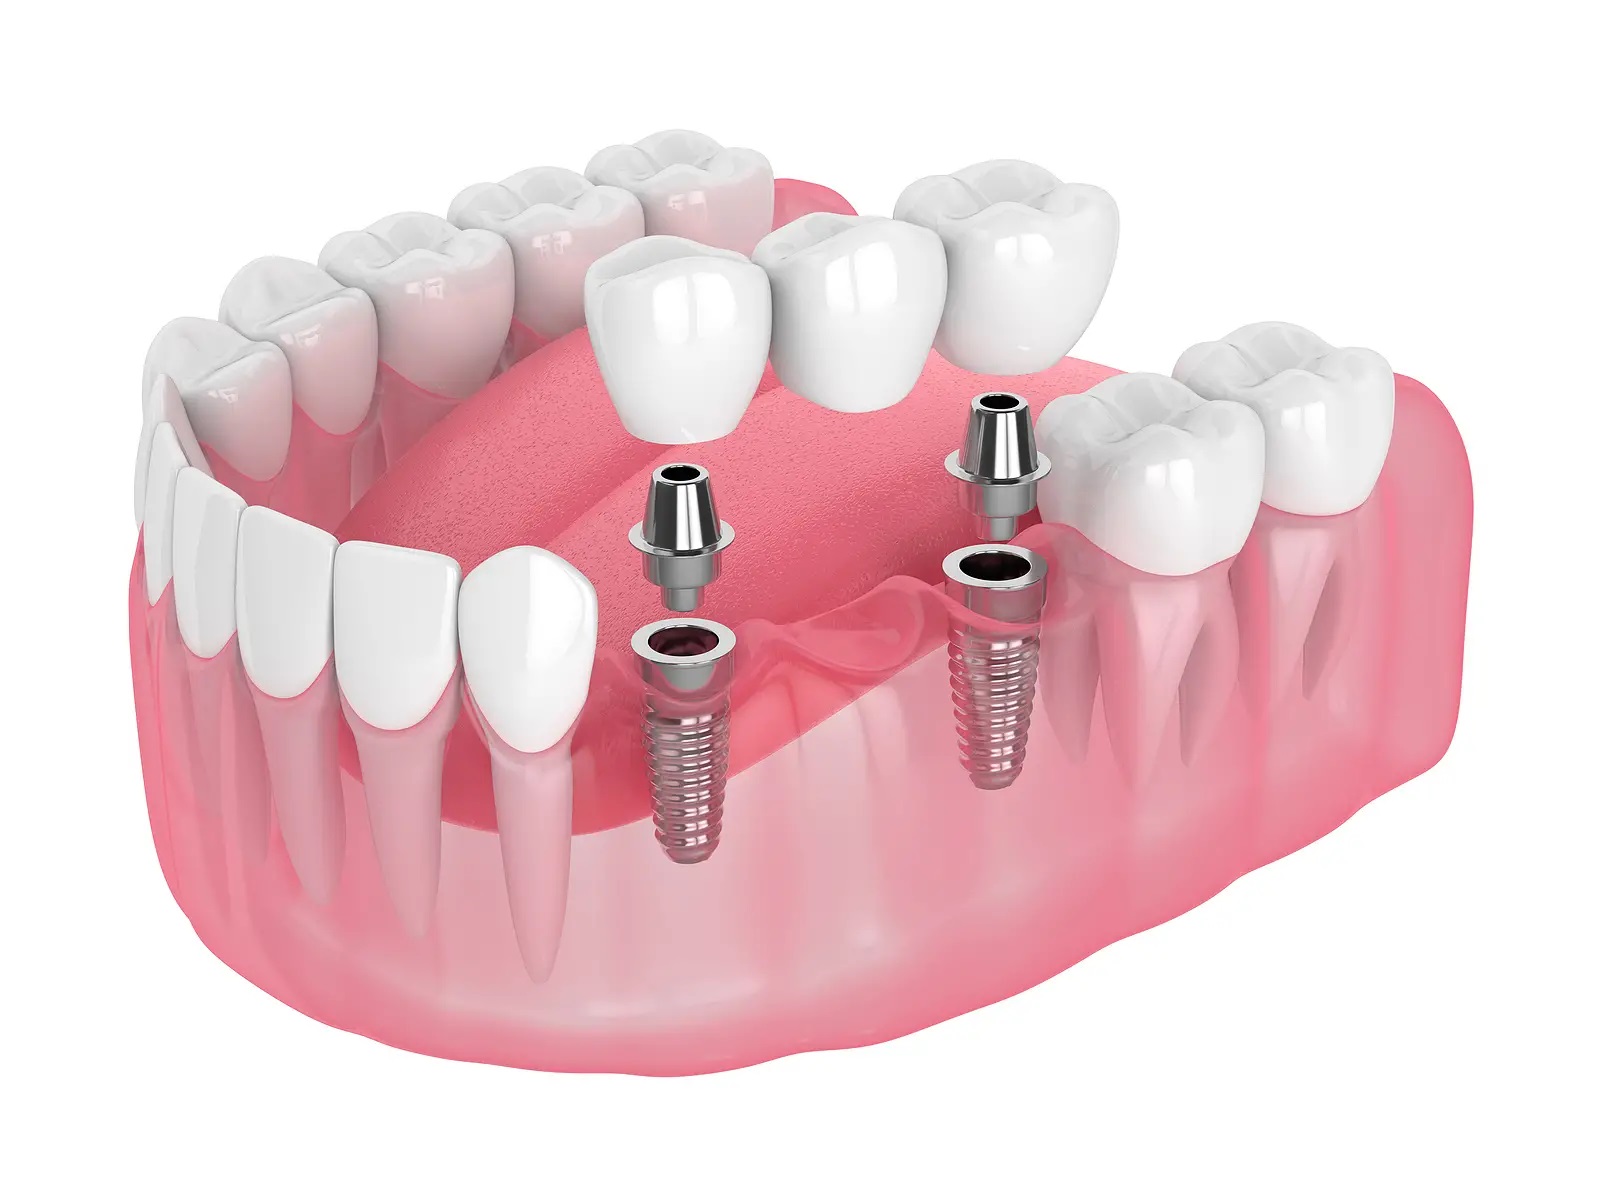 Molar Tooth Implant